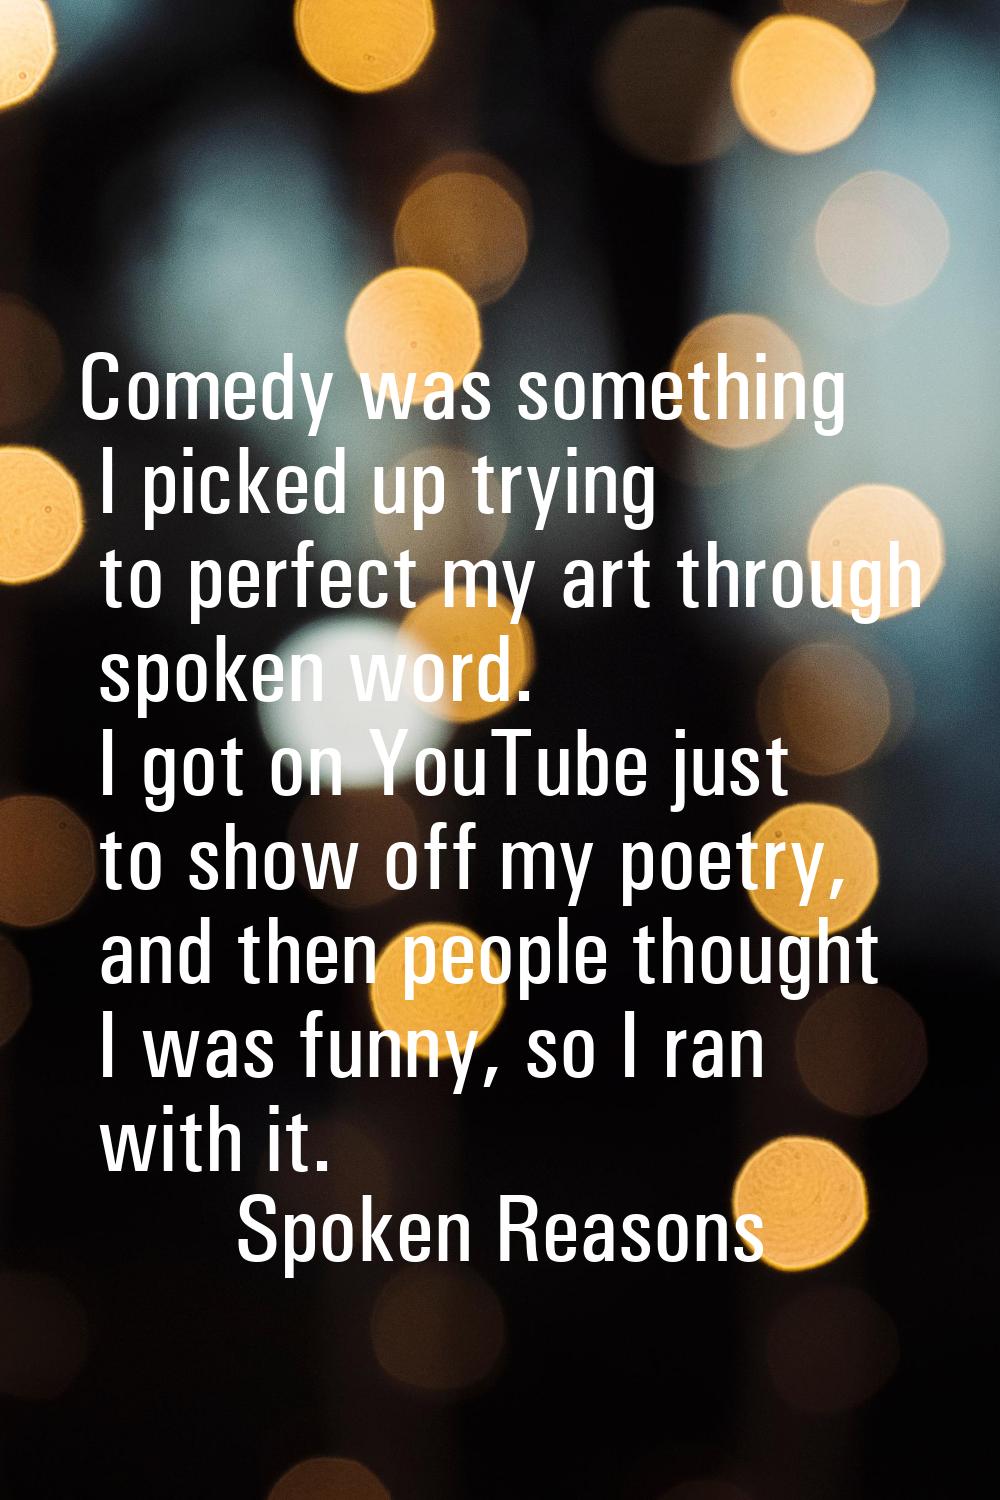 Comedy was something I picked up trying to perfect my art through spoken word. I got on YouTube jus